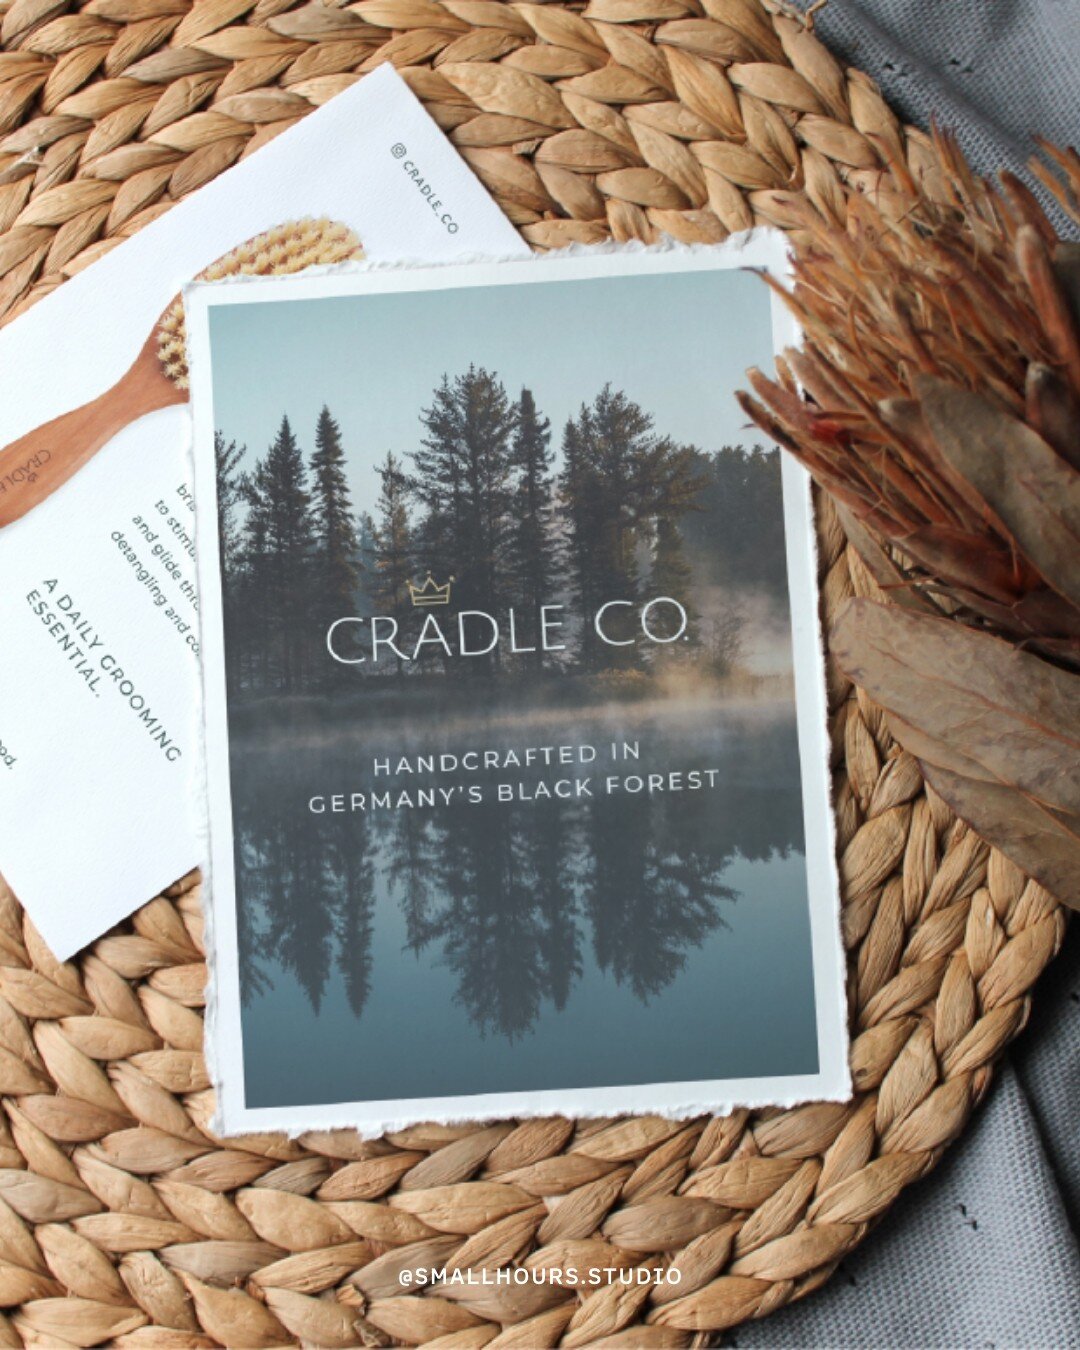 Cradle Co. is a Sydney-based brand offering small-batch handcrafted wooden brushes for babies, toddlers and adults. We were tasked with creating eco-conscious packaging for a diverse line-up of wooden brushes within this new business&rsquo; tight res